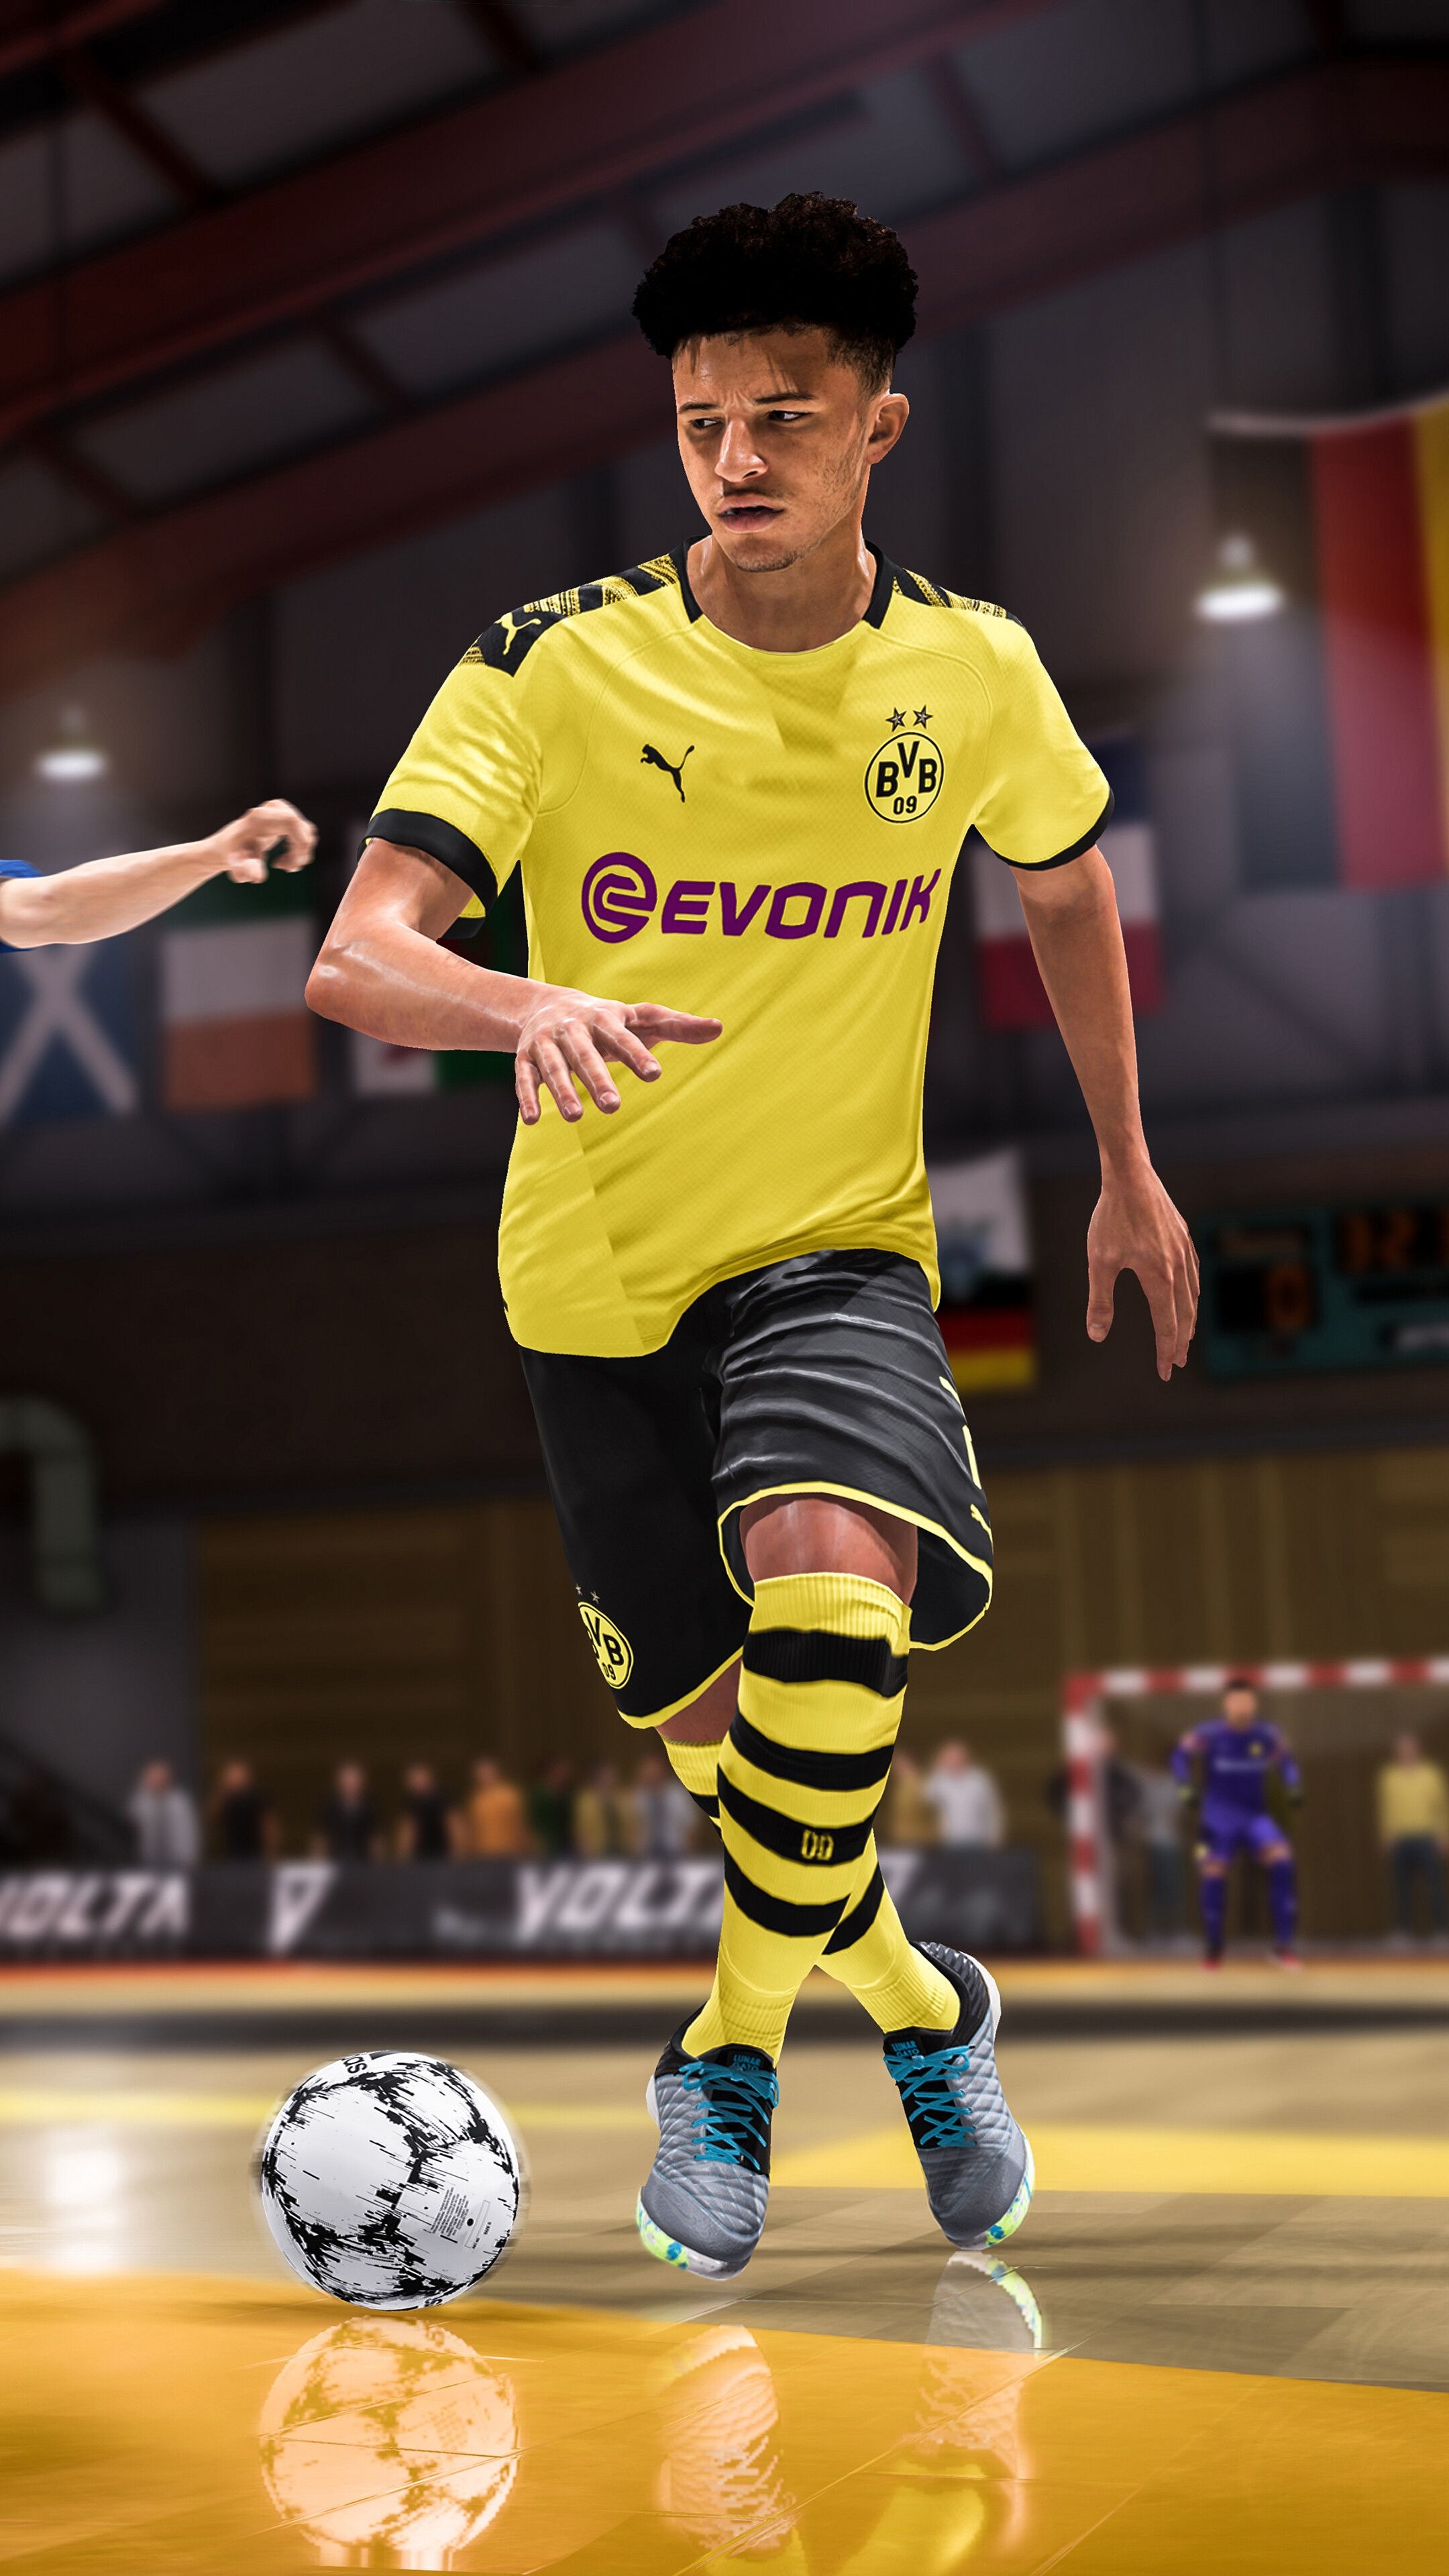 FIFA Soccer (Game): Listed in Guinness World Records, Authentic gameplay. 2160x3840 4K Background.